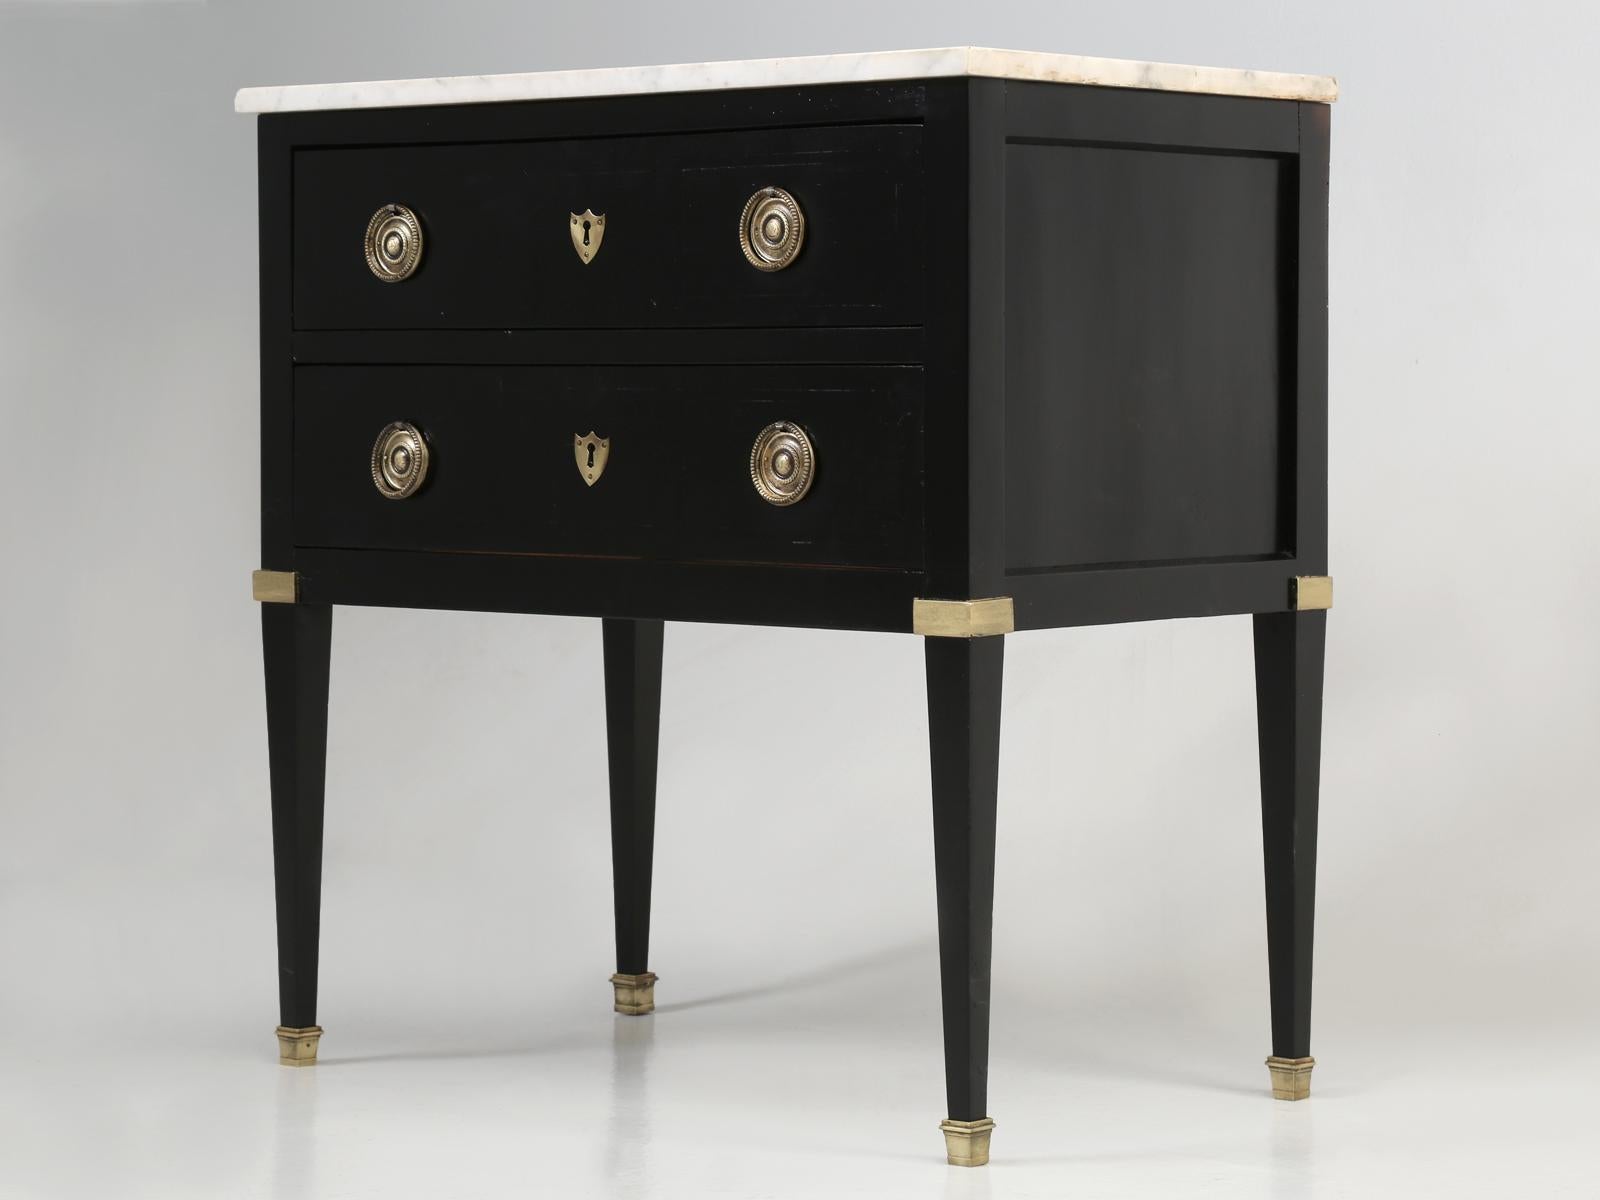 Antique French commode in an ebonized finish with its original marble top, which does have a chipped corner. Because of its petite size and marble top, this antique French commode would make the perfect nightstand table. 
**There are two holes that